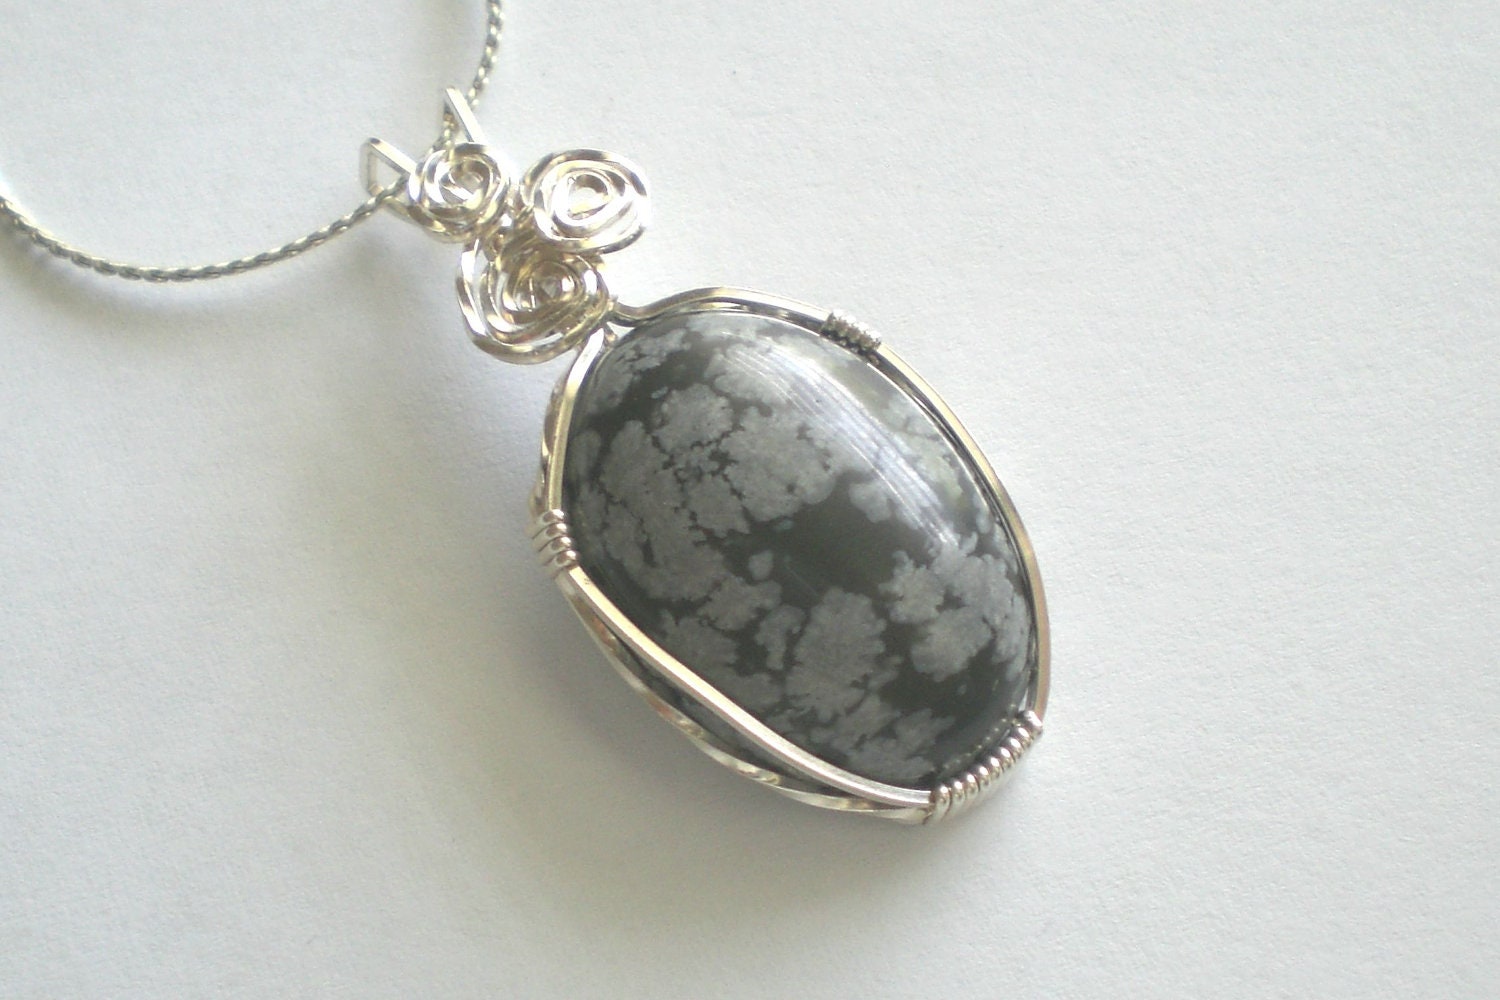 Snowflake Obsidian oval wire wrapped in sterling silver pendant